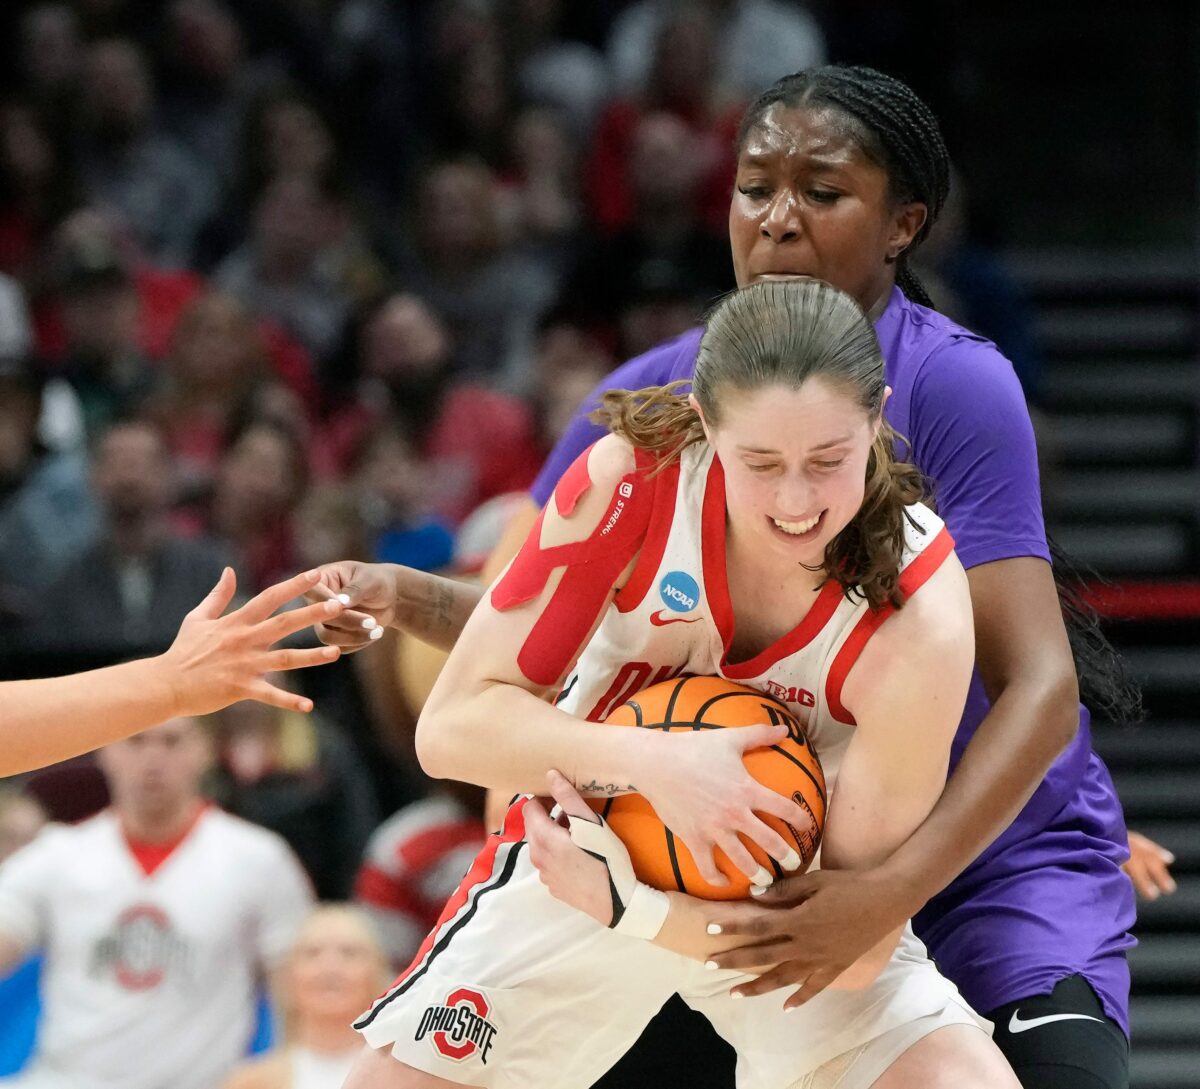 Ohio State women’s basketball advances to second round of NCAA Tournament with win over James Madison